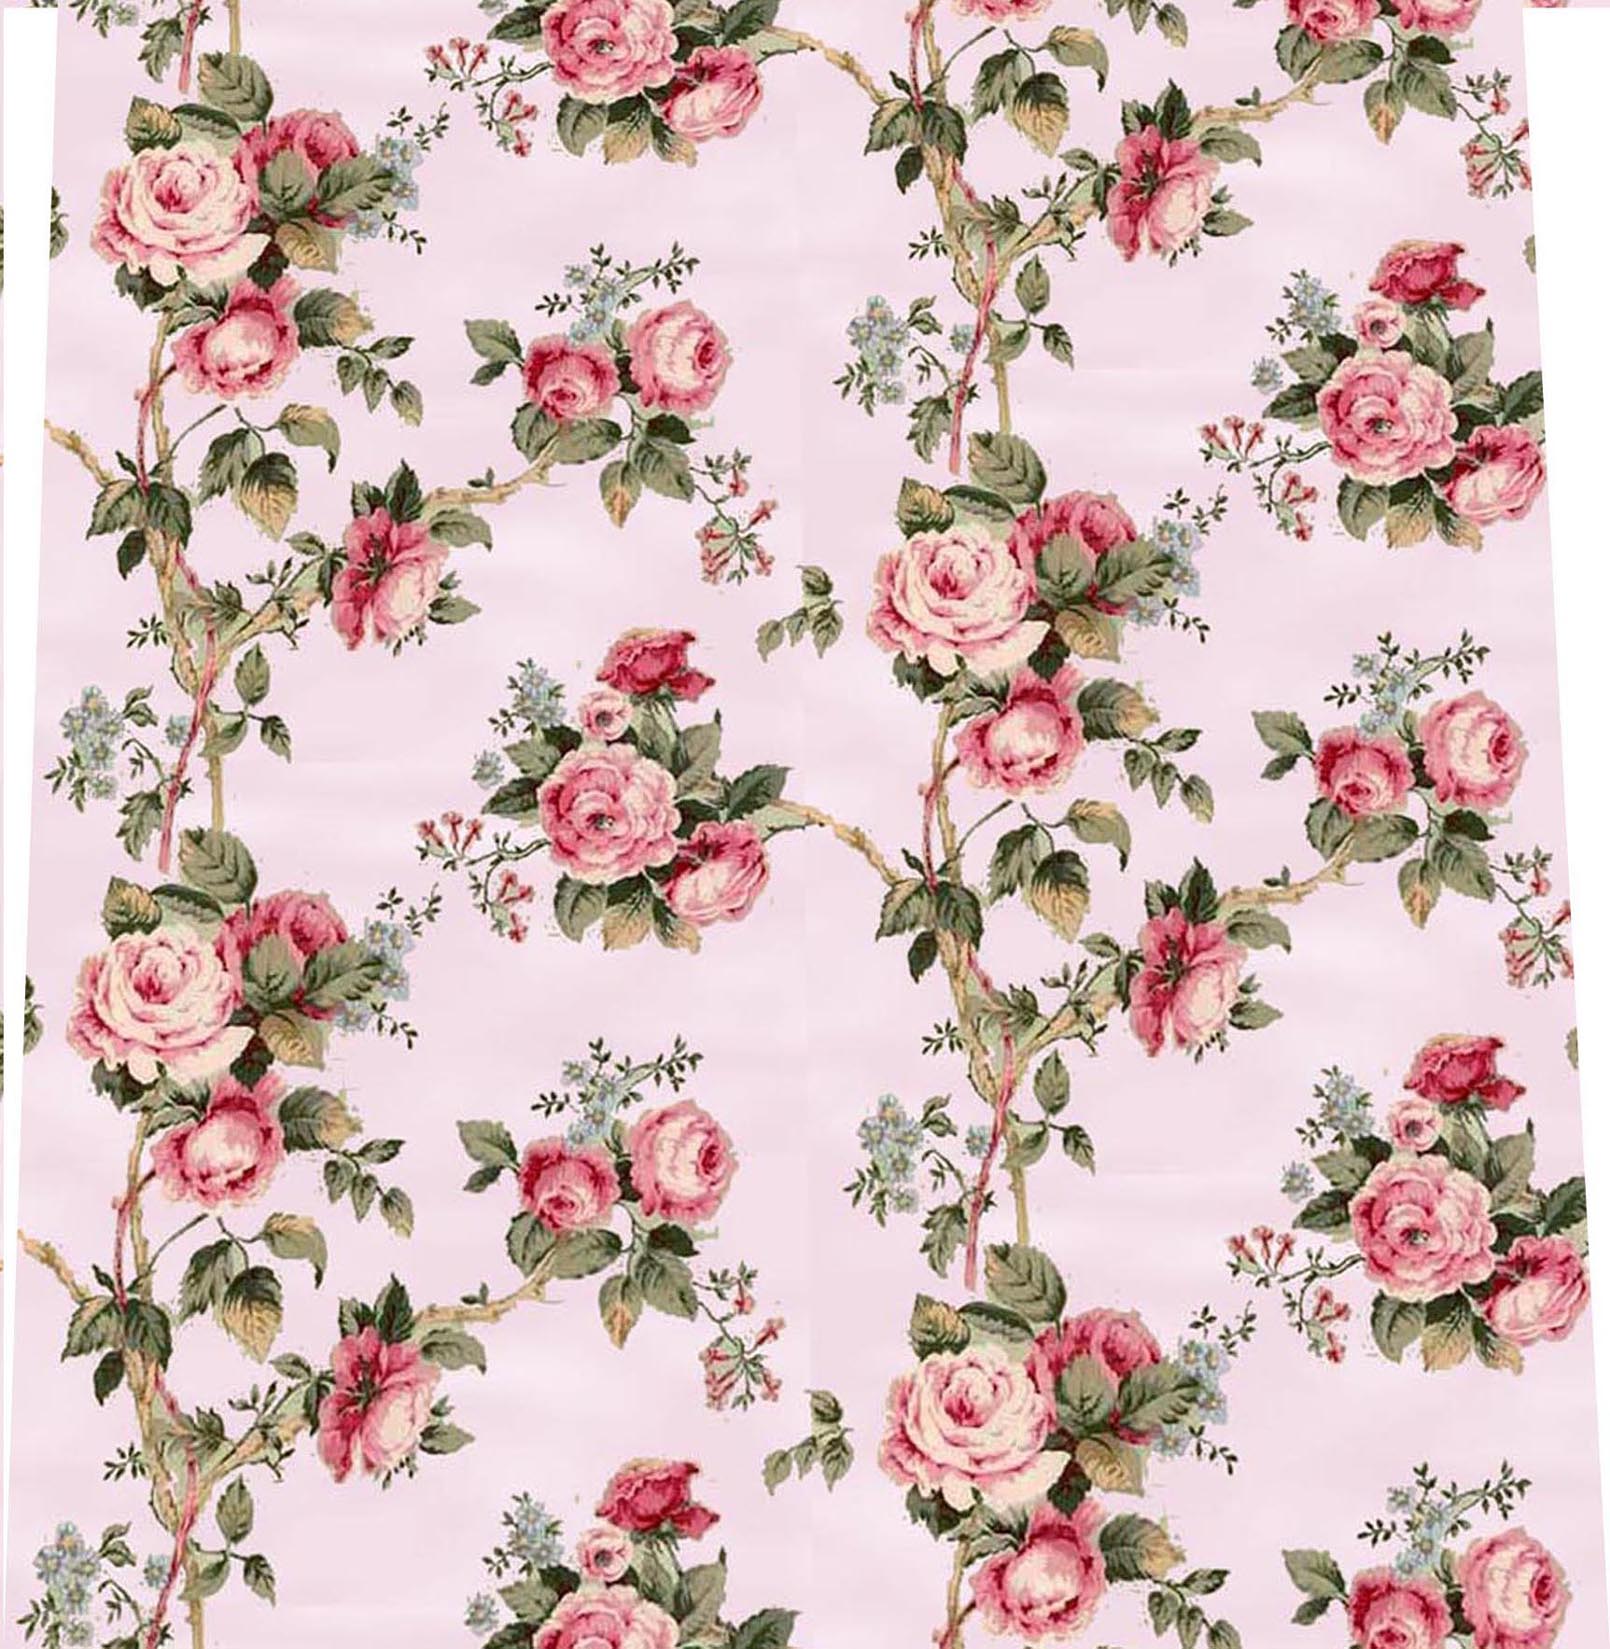  good looking wallpaper Vintage Rose Cottage style shabby chic